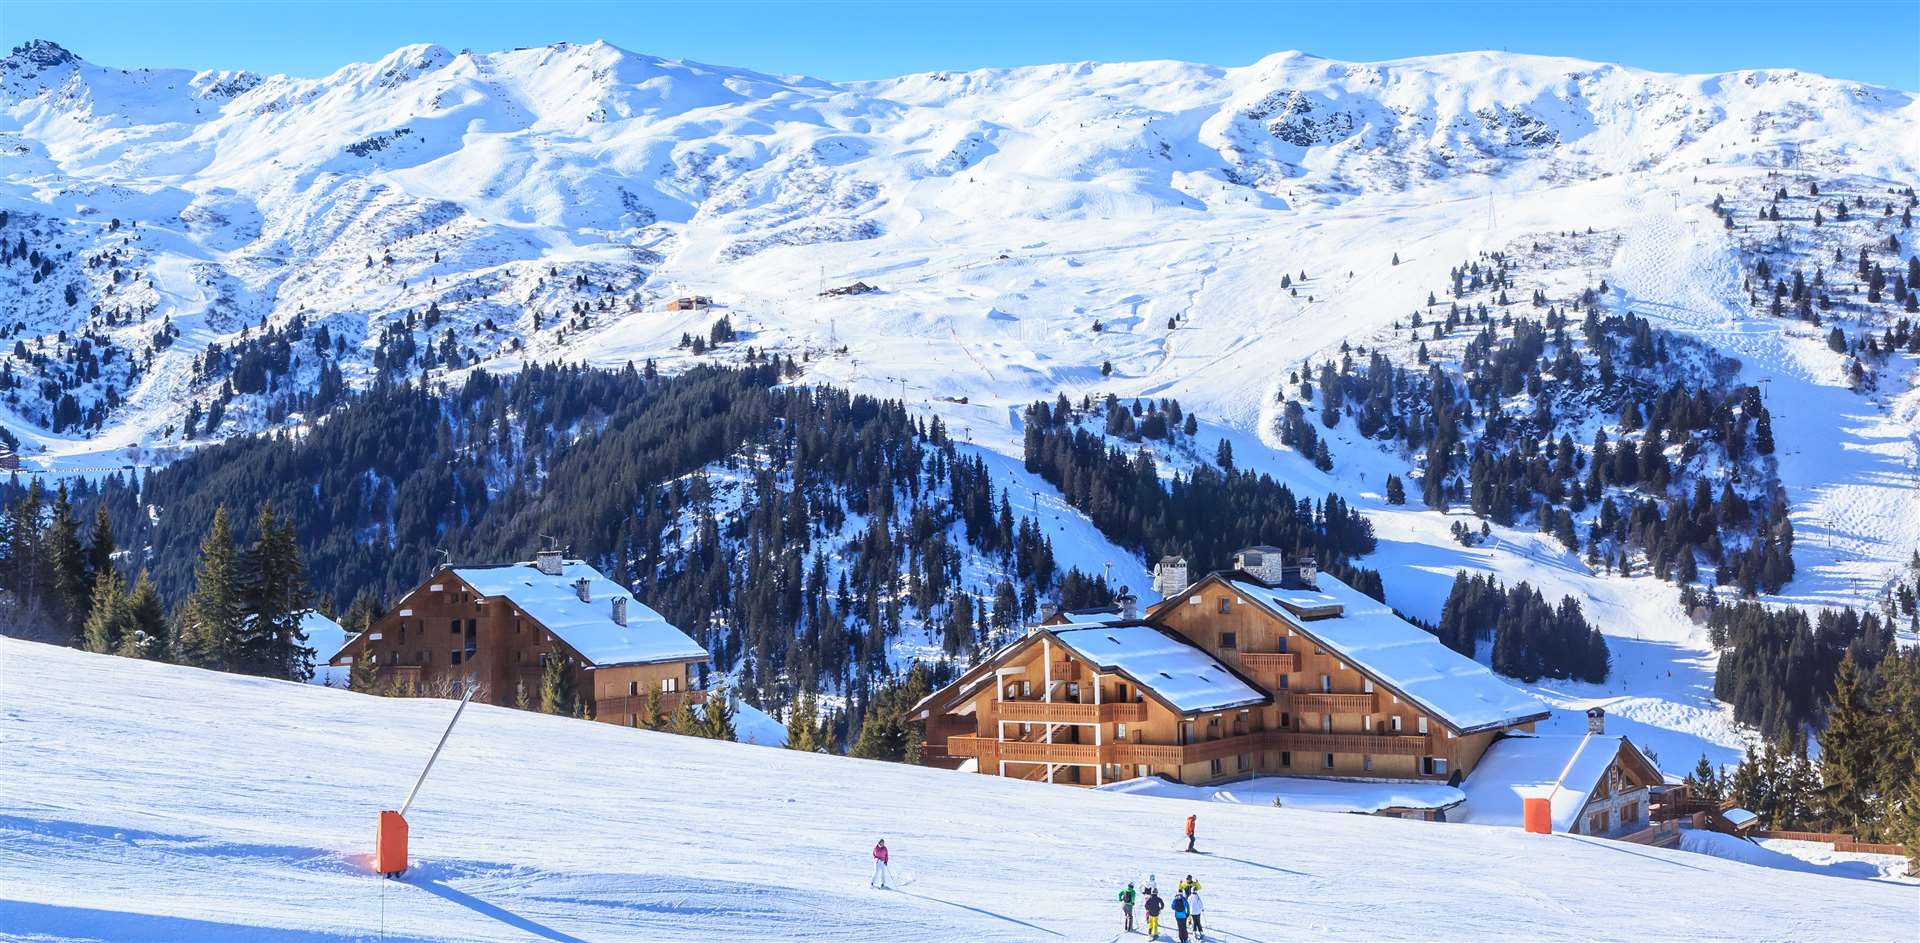 There is an abundance of wide open spaces around the ski resort in Meribel.